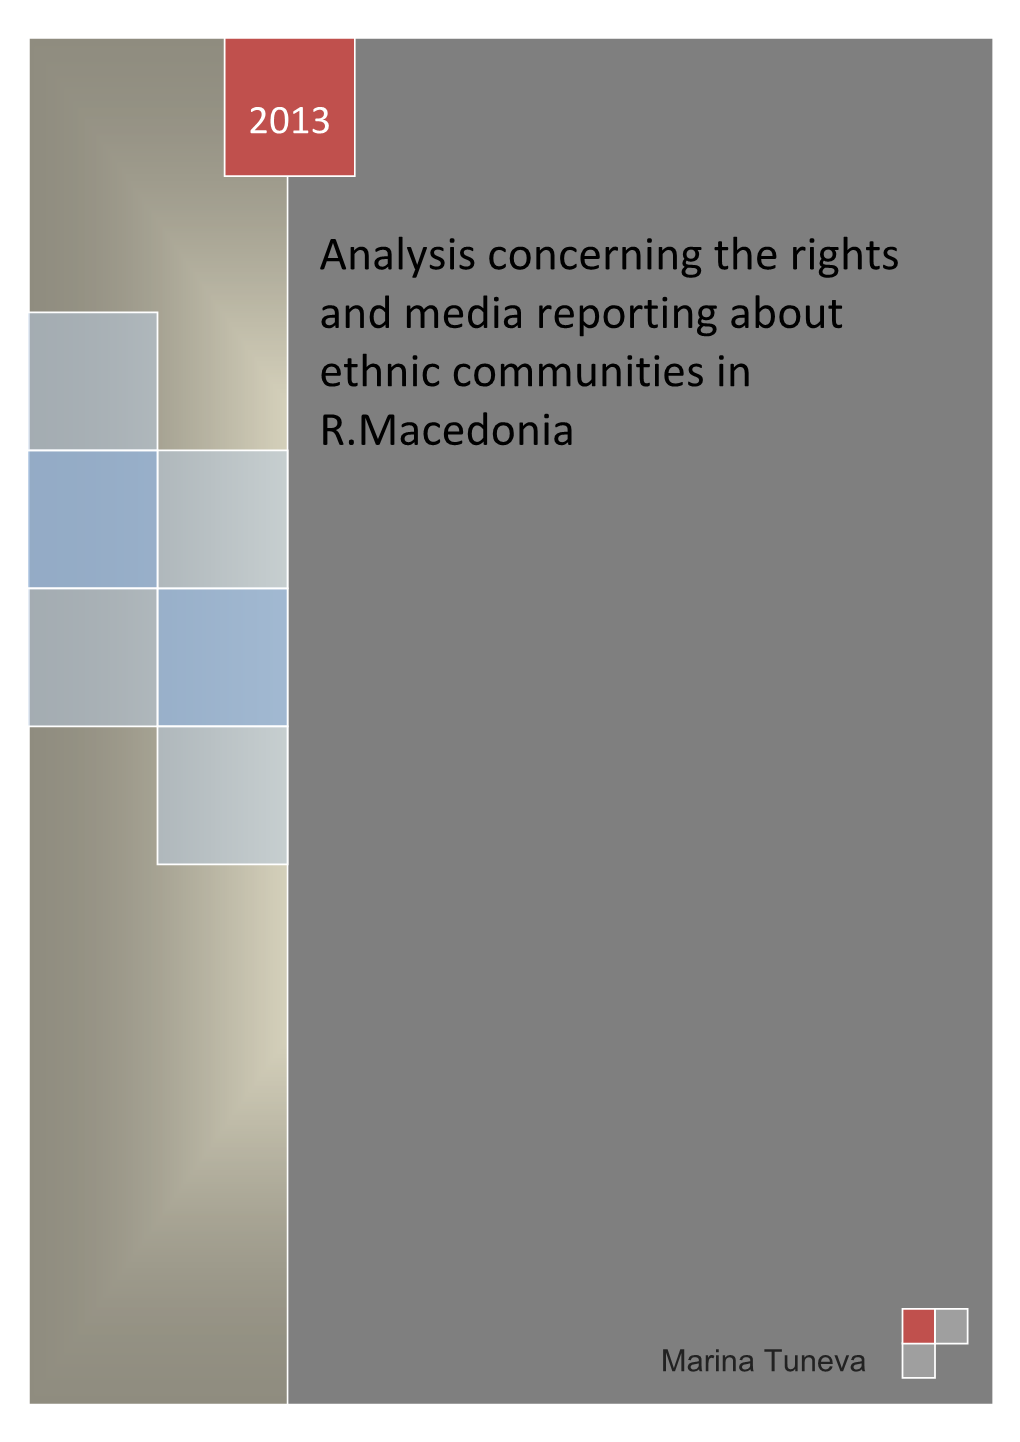 Analysis Concerning the Rights and Media Reporting About Ethnic Communities in R.Macedonia